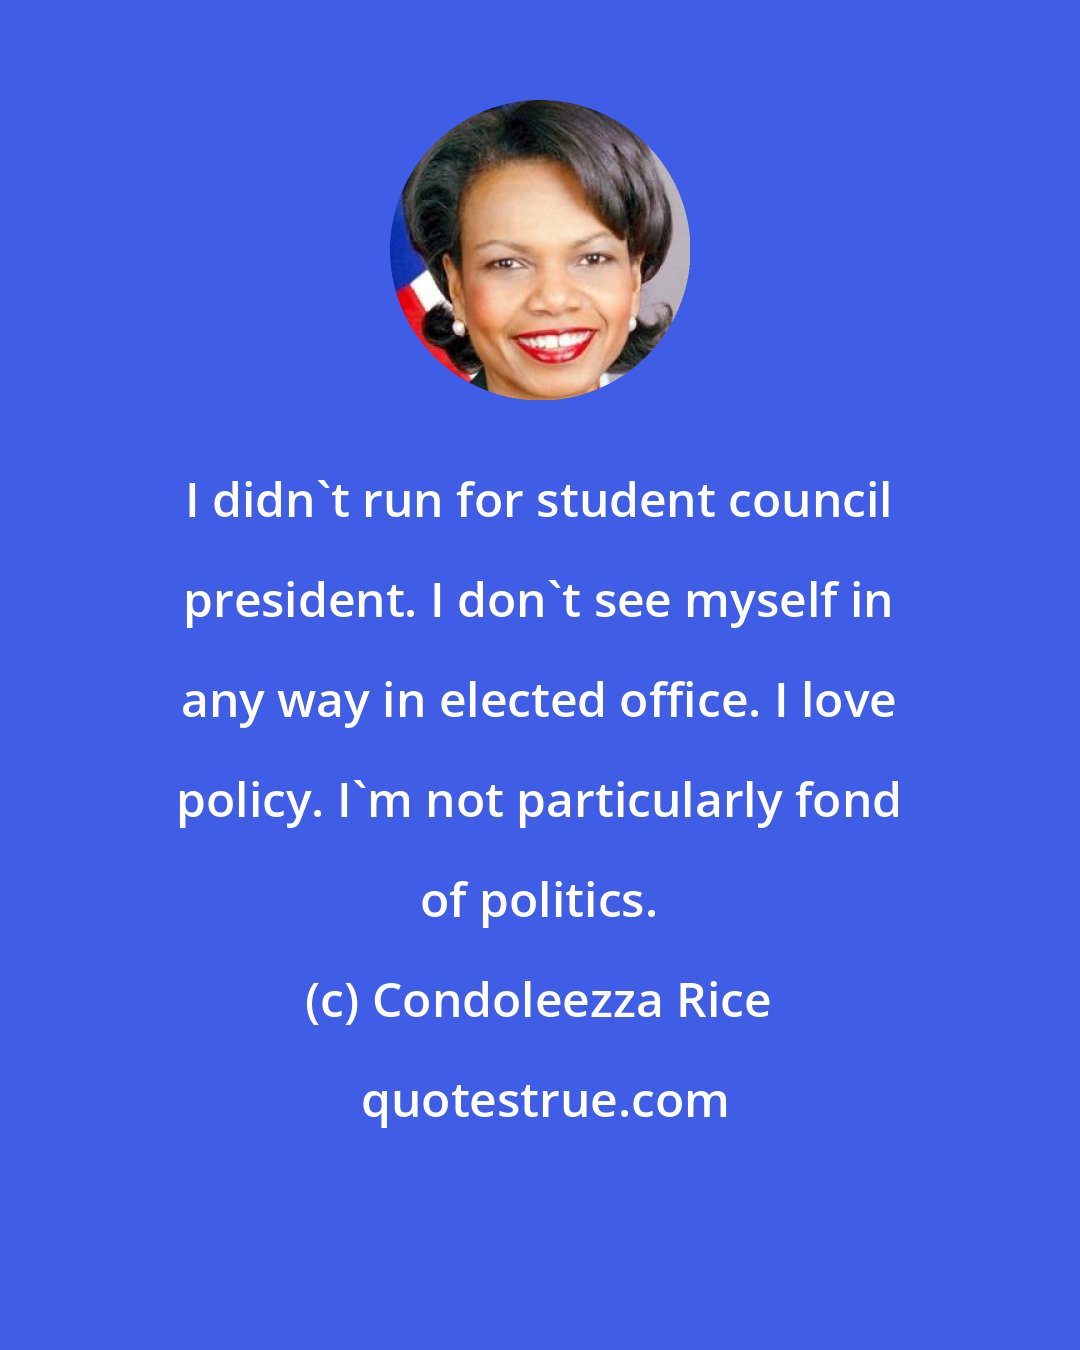 Condoleezza Rice: I didn't run for student council president. I don't see myself in any way in elected office. I love policy. I'm not particularly fond of politics.